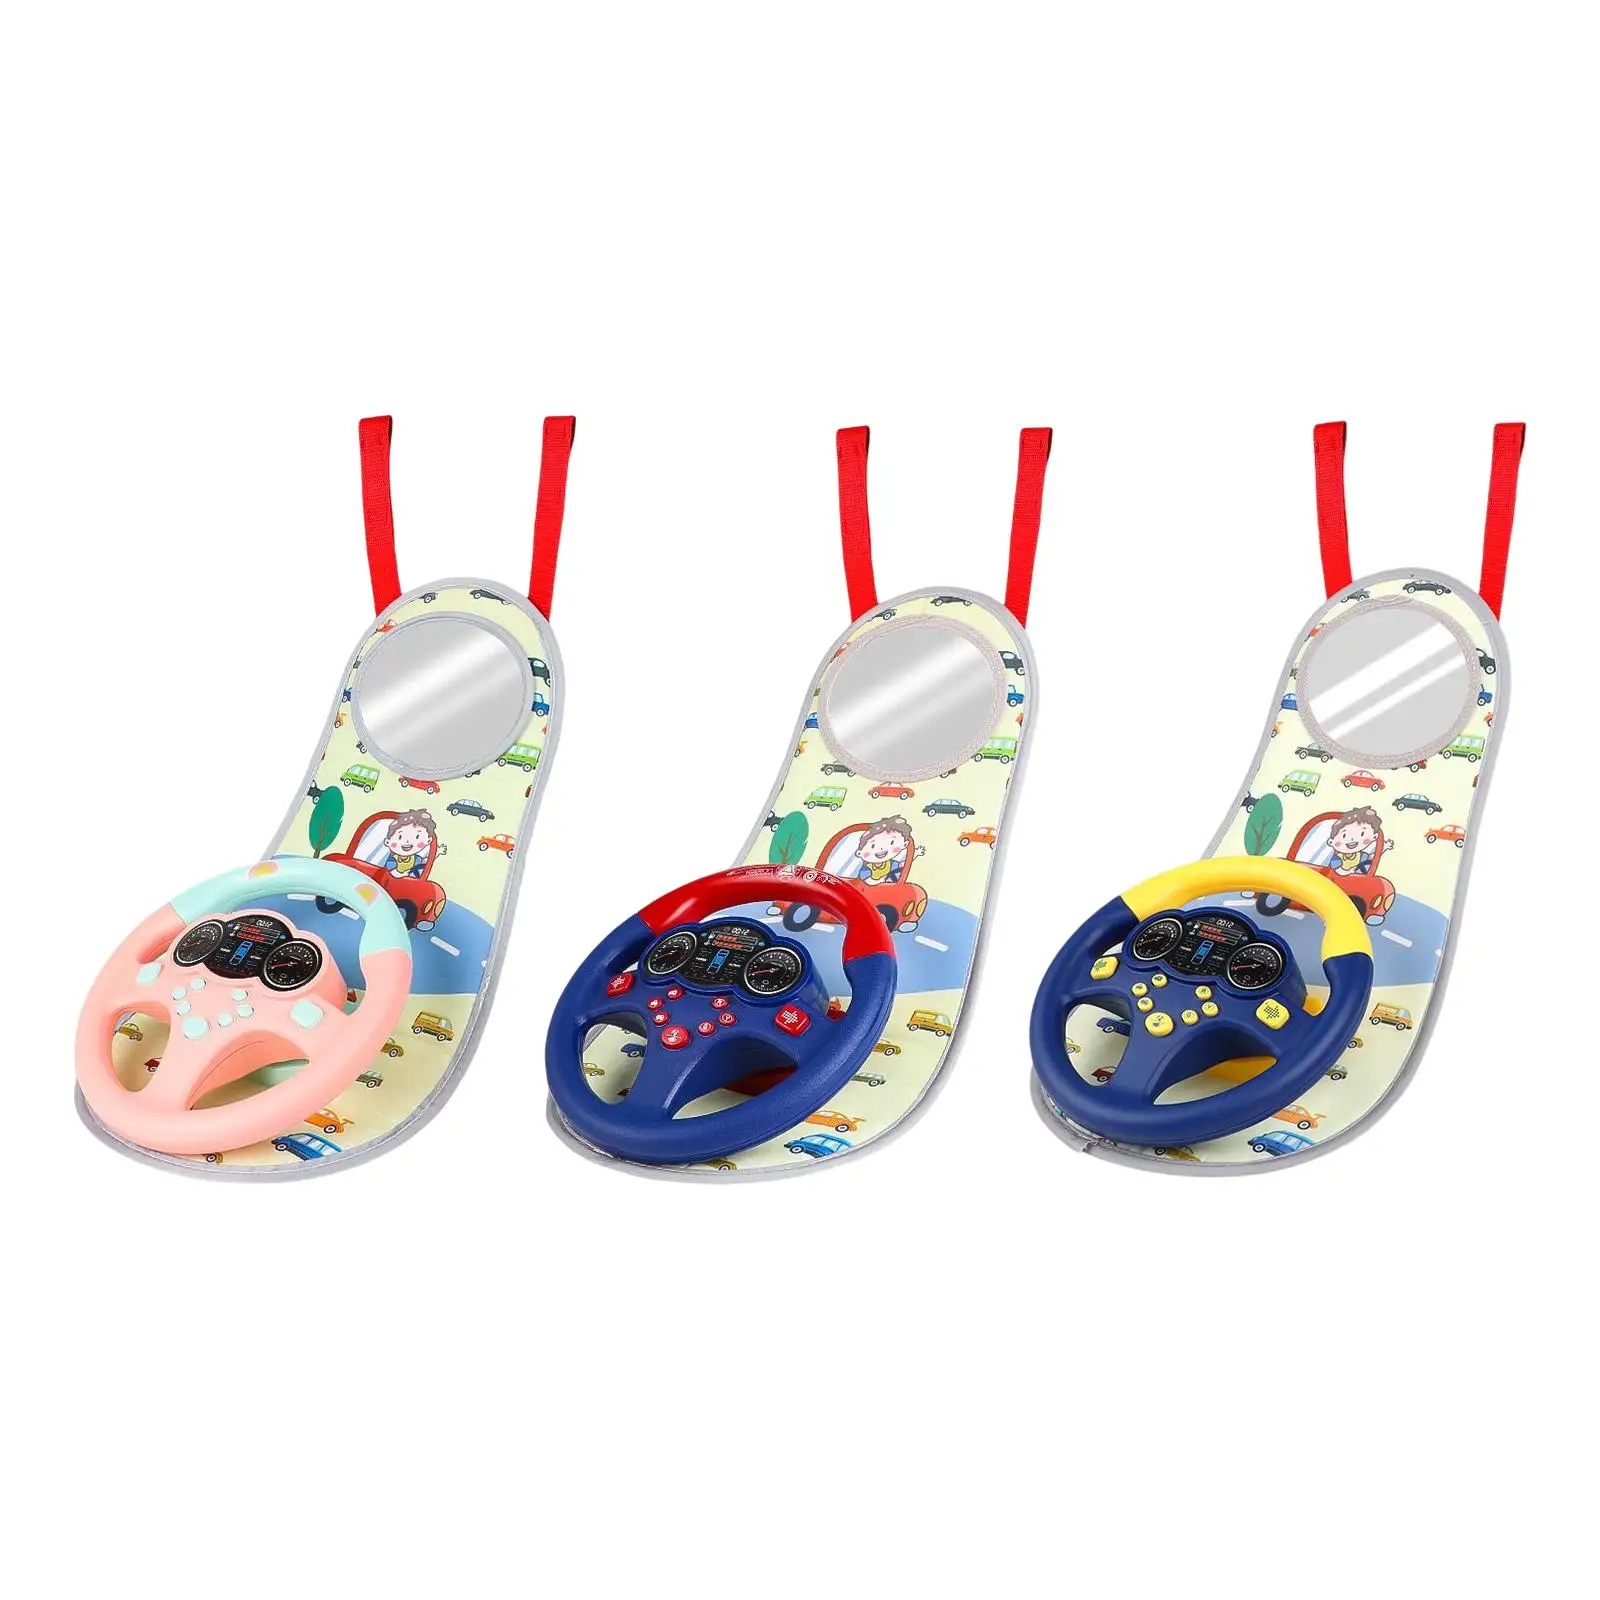 Carseat Toys Steering Wheel Musical Activity Play Center Toy Car Seat Toys with Mirror for Girls Boys